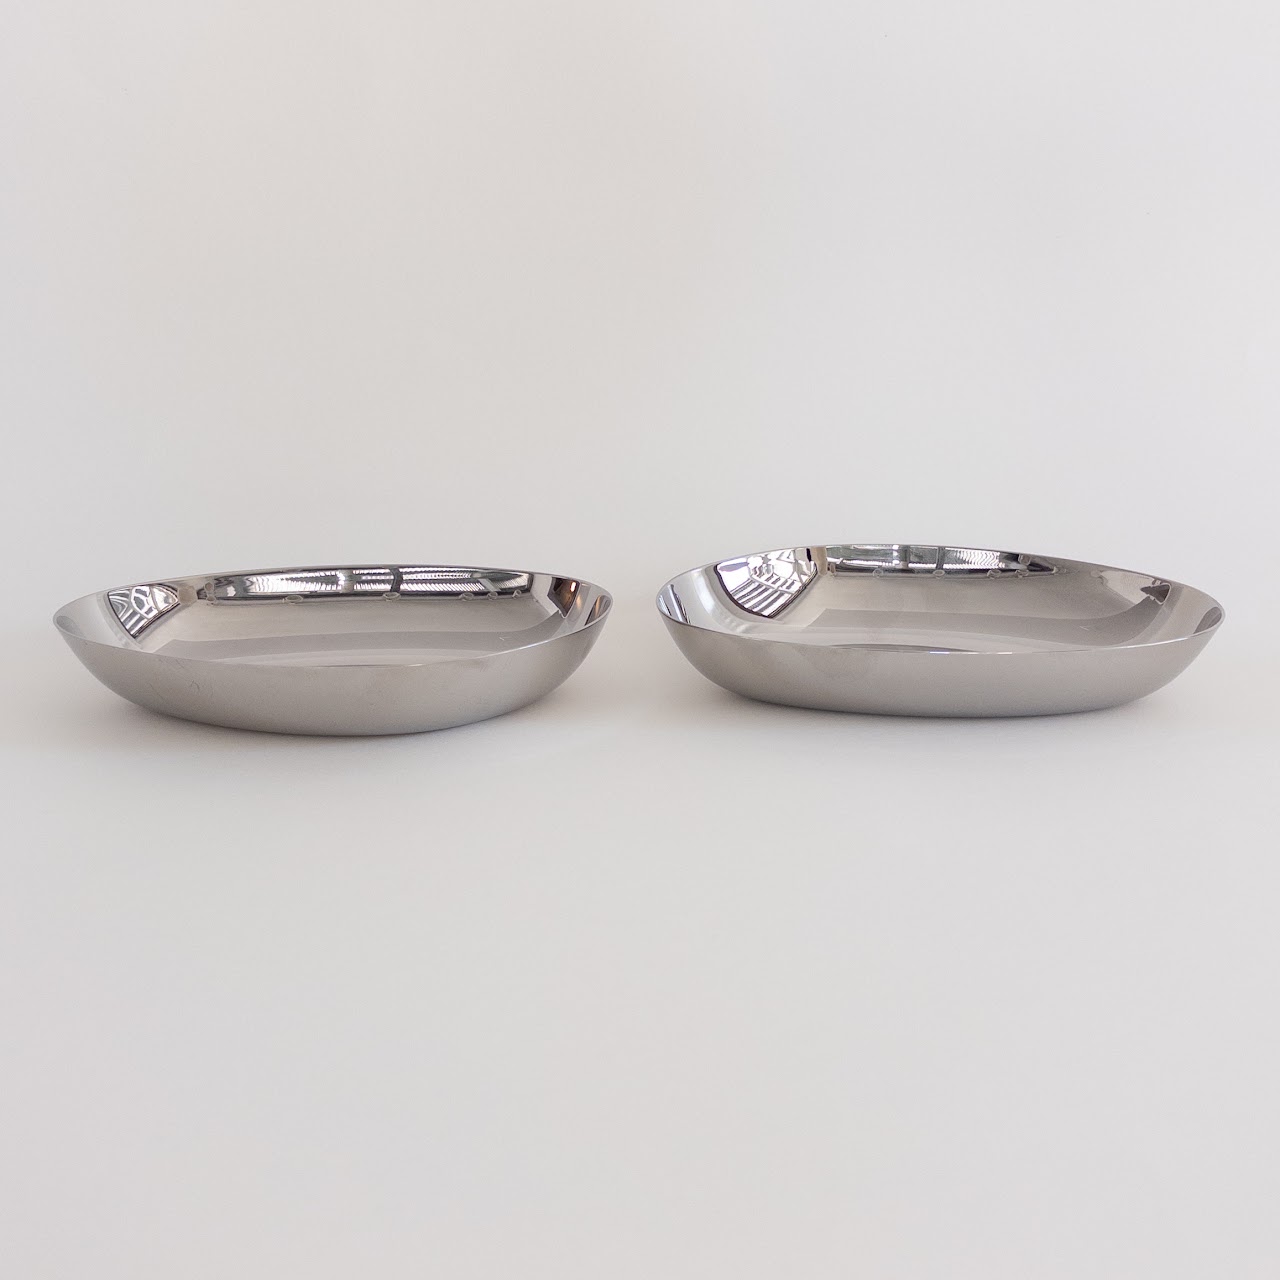 Georg Jensen Set Of Two Small Trays and 12 Food/Cocktail Sticks